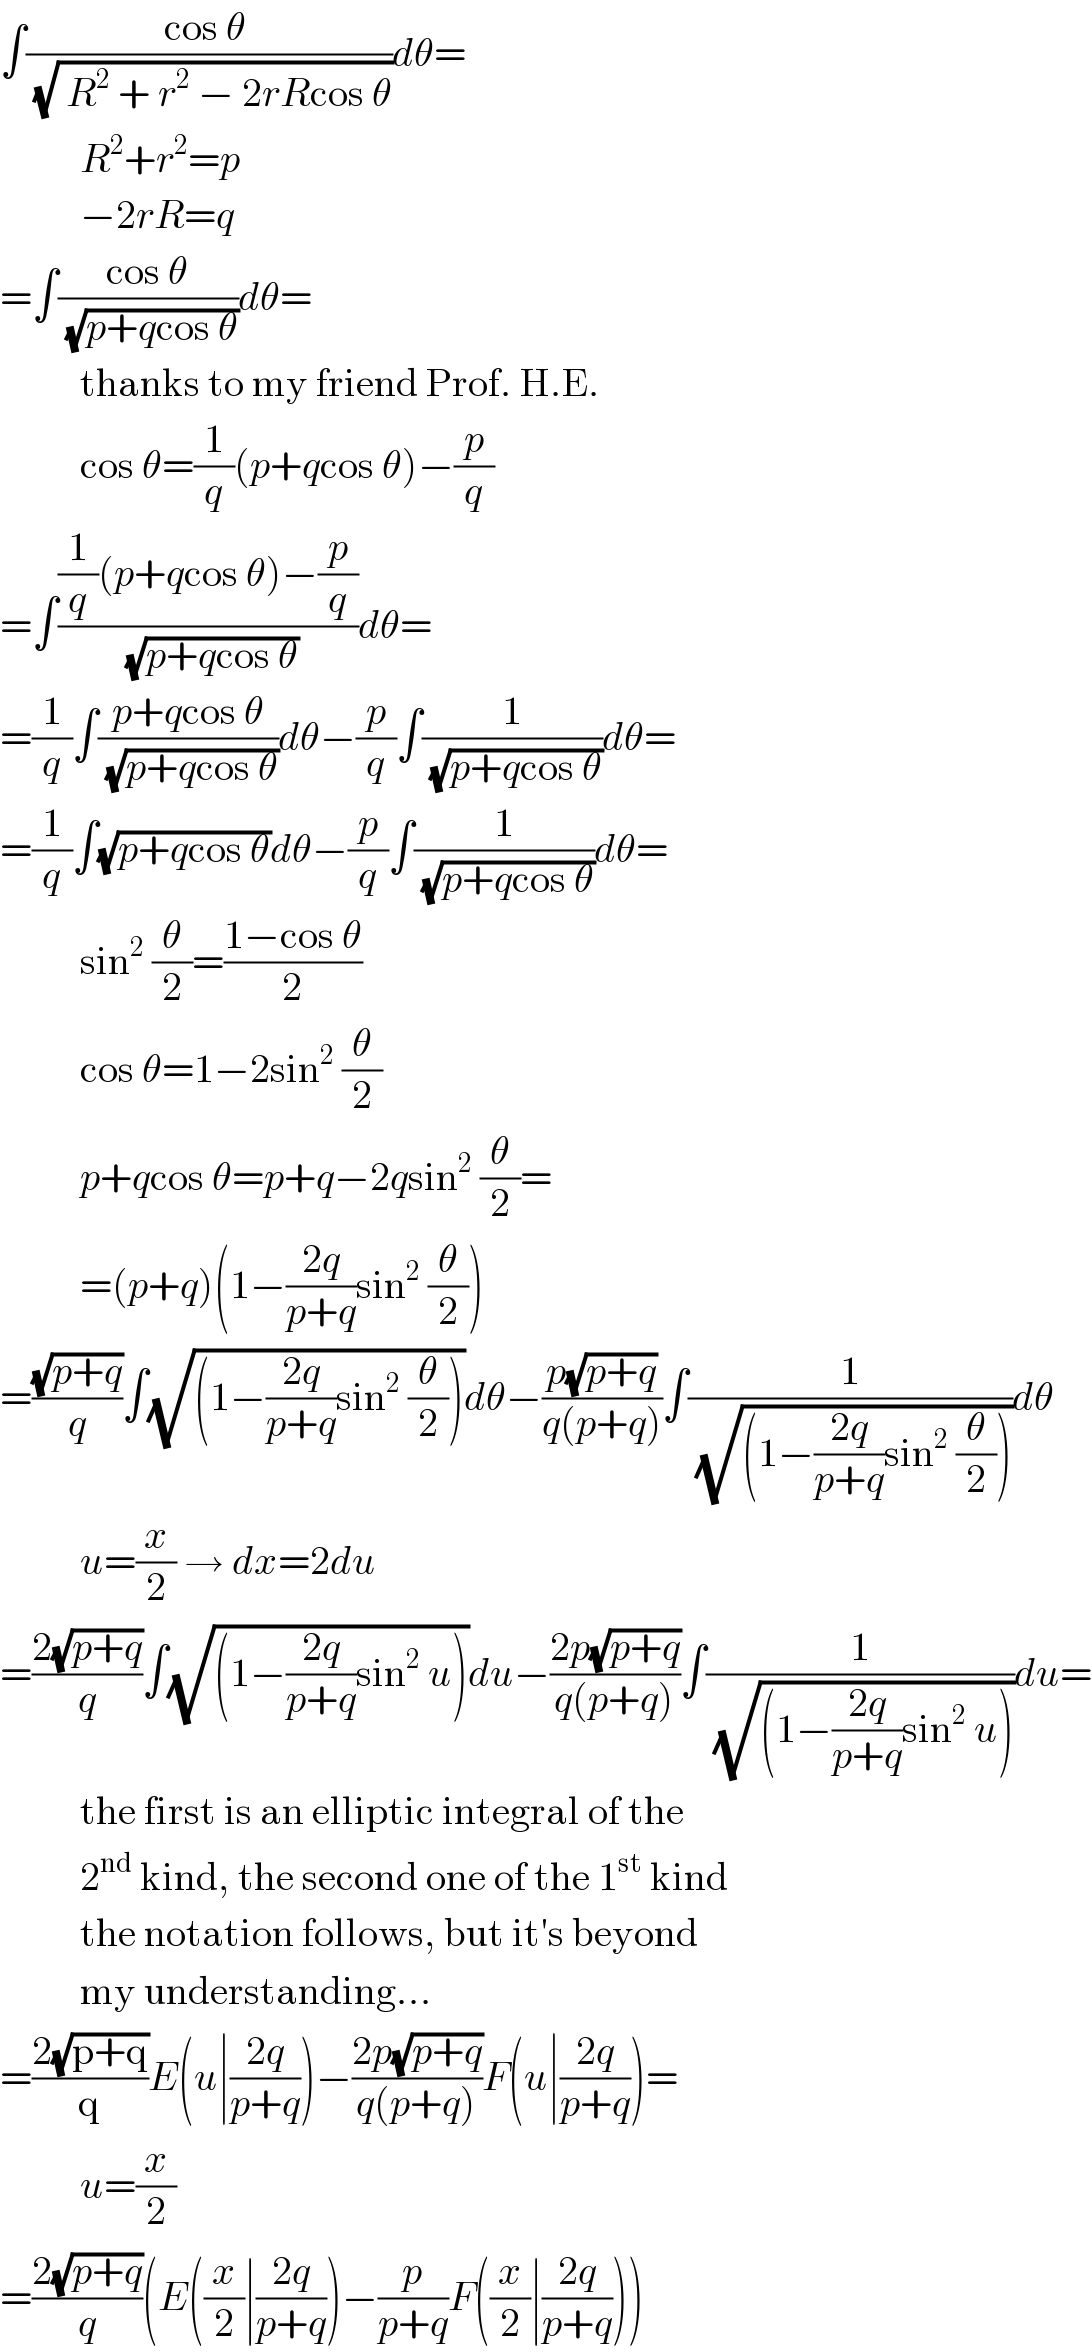 ∫((cos θ )/(√( R^2  + r^2  − 2rRcos θ)))dθ=            R^2 +r^2 =p            −2rR=q  =∫((cos θ)/(√(p+qcos θ)))dθ=            thanks to my friend Prof. H.E.            cos θ=(1/q)(p+qcos θ)−(p/q)  =∫(((1/q)(p+qcos θ)−(p/q))/(√(p+qcos θ)))dθ=  =(1/q)∫((p+qcos θ)/(√(p+qcos θ)))dθ−(p/q)∫(1/(√(p+qcos θ)))dθ=  =(1/q)∫(√(p+qcos θ))dθ−(p/q)∫(1/(√(p+qcos θ)))dθ=            sin^2  (θ/2)=((1−cos θ)/2)            cos θ=1−2sin^2  (θ/2)            p+qcos θ=p+q−2qsin^2  (θ/2)=            =(p+q)(1−((2q)/(p+q))sin^2  (θ/2))  =((√(p+q))/q)∫(√((1−((2q)/(p+q))sin^2  (θ/2))))dθ−((p(√(p+q)))/(q(p+q)))∫(1/(√((1−((2q)/(p+q))sin^2  (θ/2)))))dθ            u=(x/2) → dx=2du  =((2(√(p+q)))/q)∫(√((1−((2q)/(p+q))sin^2  u)))du−((2p(√(p+q)))/(q(p+q)))∫(1/(√((1−((2q)/(p+q))sin^2  u))))du=            the first is an elliptic integral of the            2^(nd)  kind, the second one of the 1^(st)  kind            the notation follows, but it′s beyond            my understanding...  =((2(√(p+q)))/q)E(u∣((2q)/(p+q)))−((2p(√(p+q)))/(q(p+q)))F(u∣((2q)/(p+q)))=            u=(x/2)  =((2(√(p+q)))/q)(E((x/2)∣((2q)/(p+q)))−(p/(p+q))F((x/2)∣((2q)/(p+q))))  